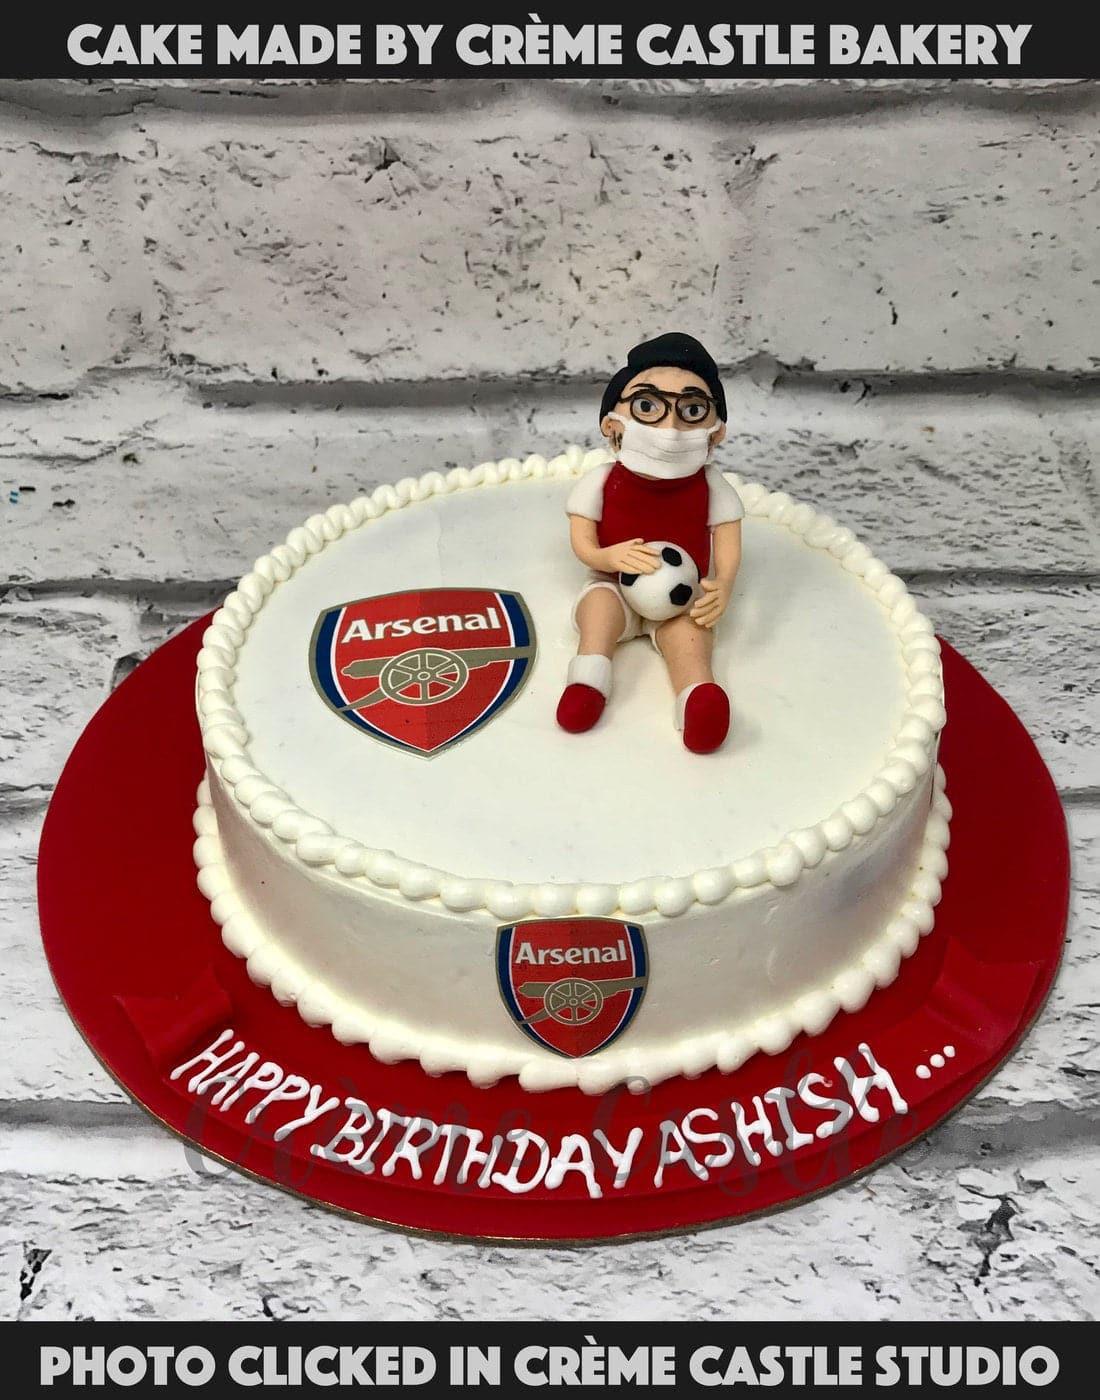 Arsenal Club Themed Cake Delivery in Delhi NCR - ₹2,999.00 Cake Express